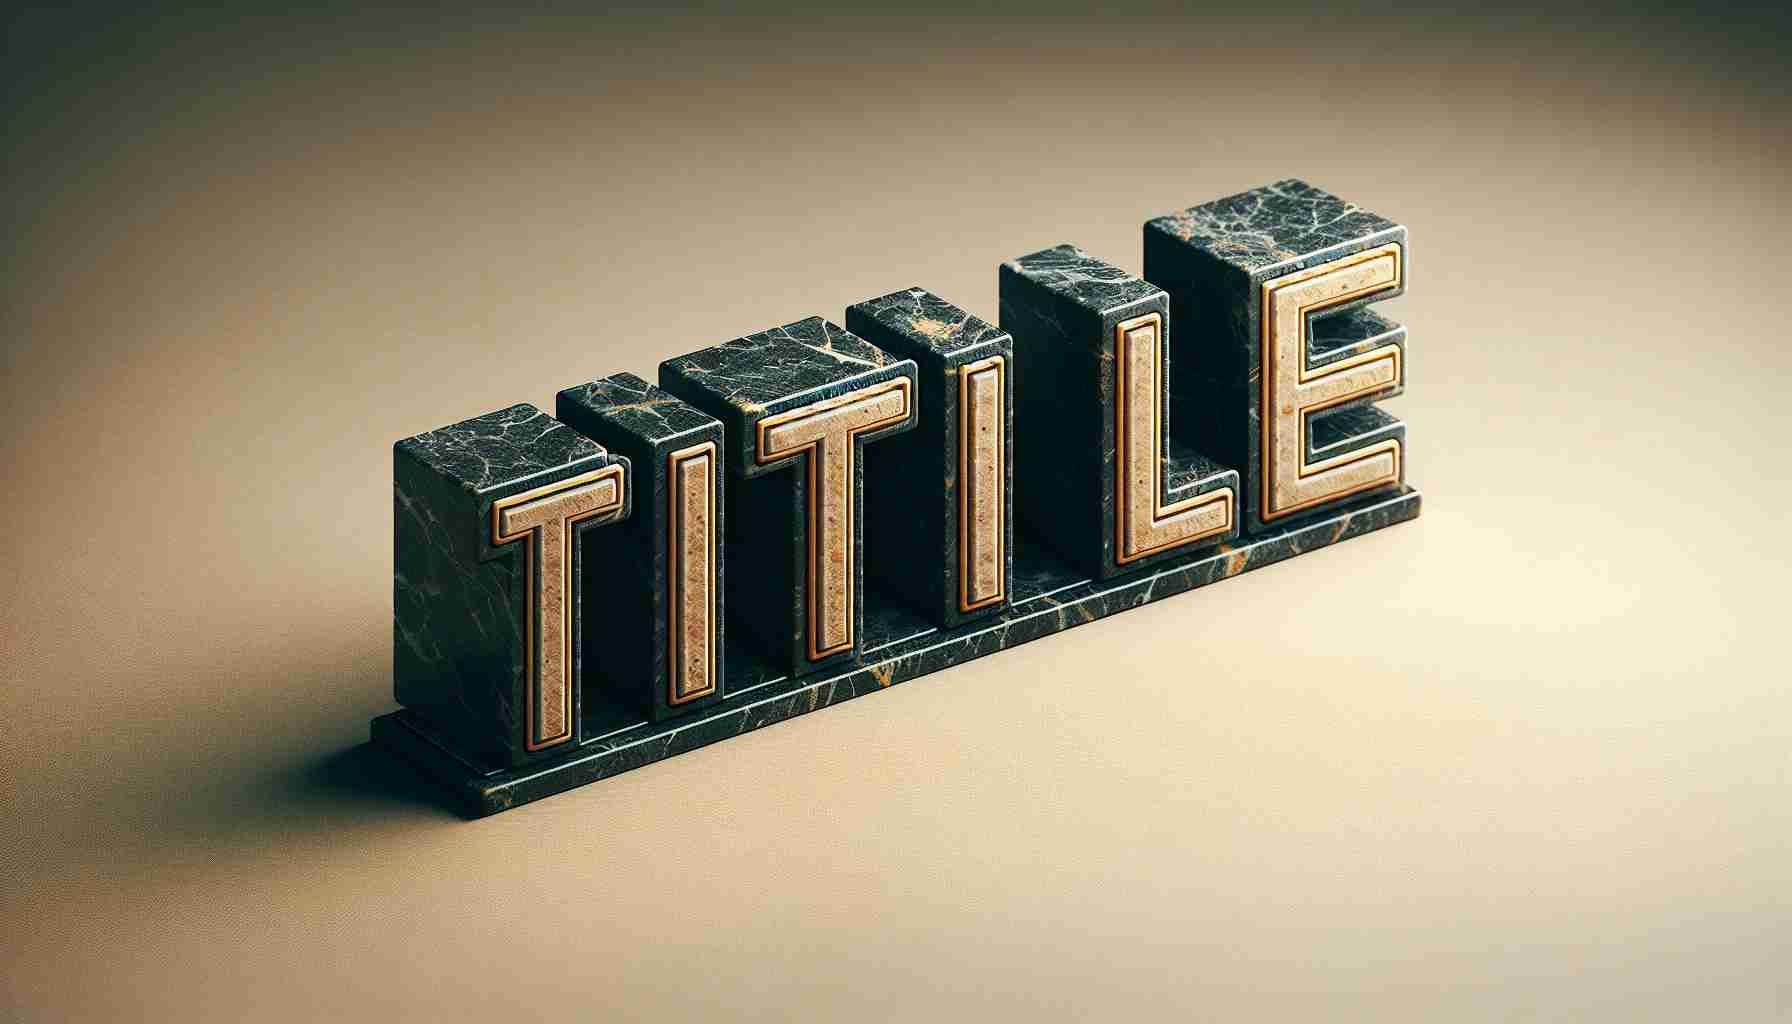 Generate a realistic, high-definition image of the word 'Title' in bold letters, set against a subtly textured, neutral background.